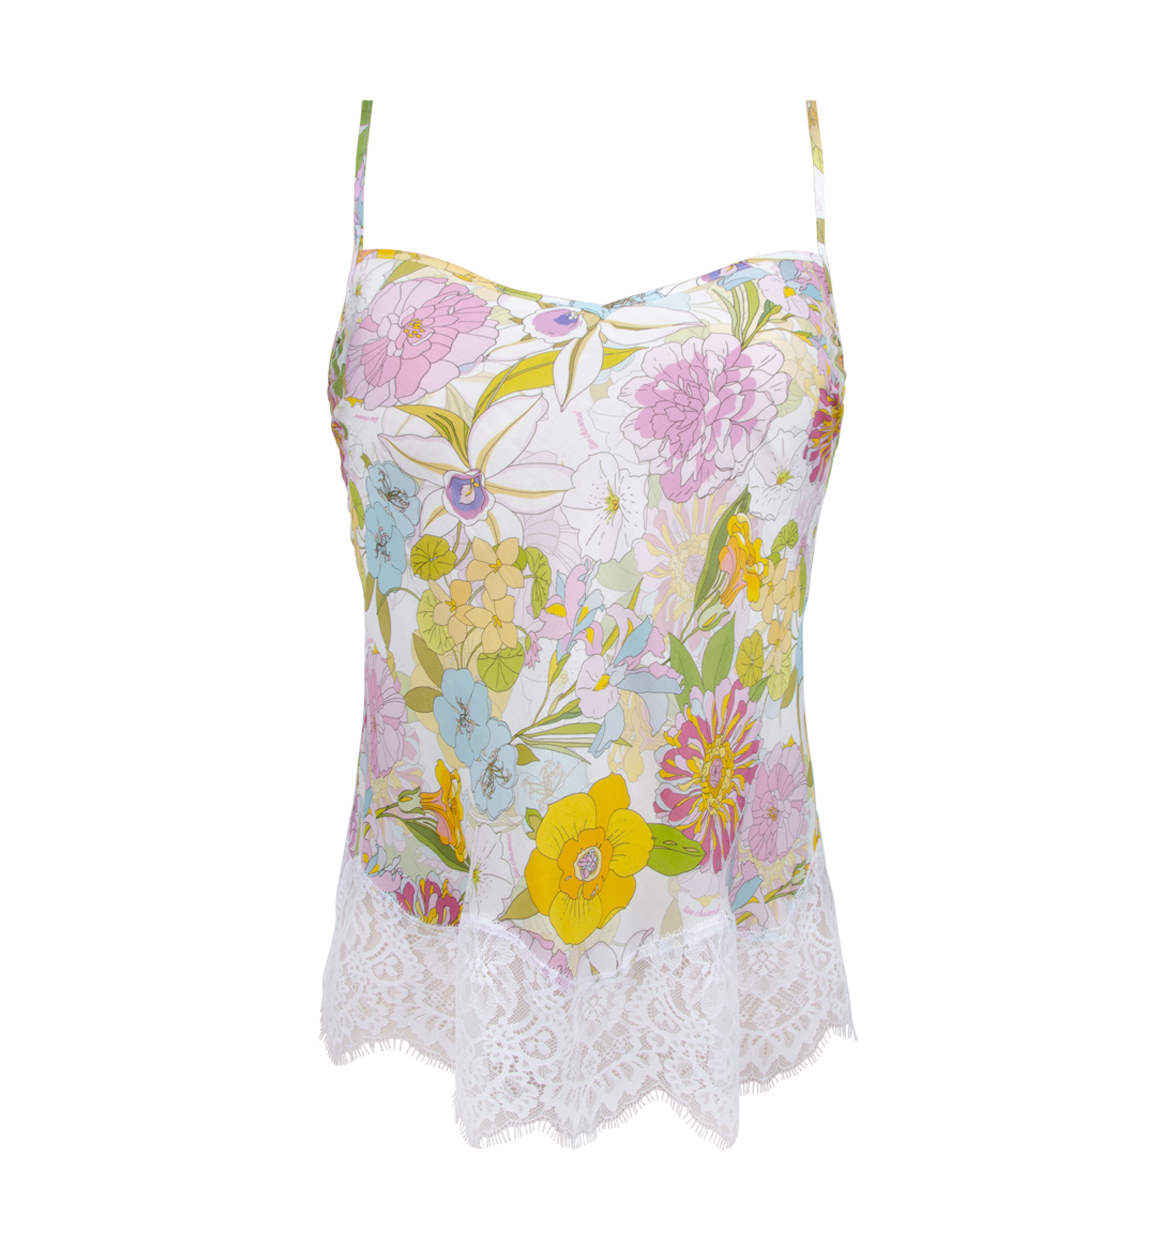 Feerie Florale - Top, ALH4225, Pastell Floral 